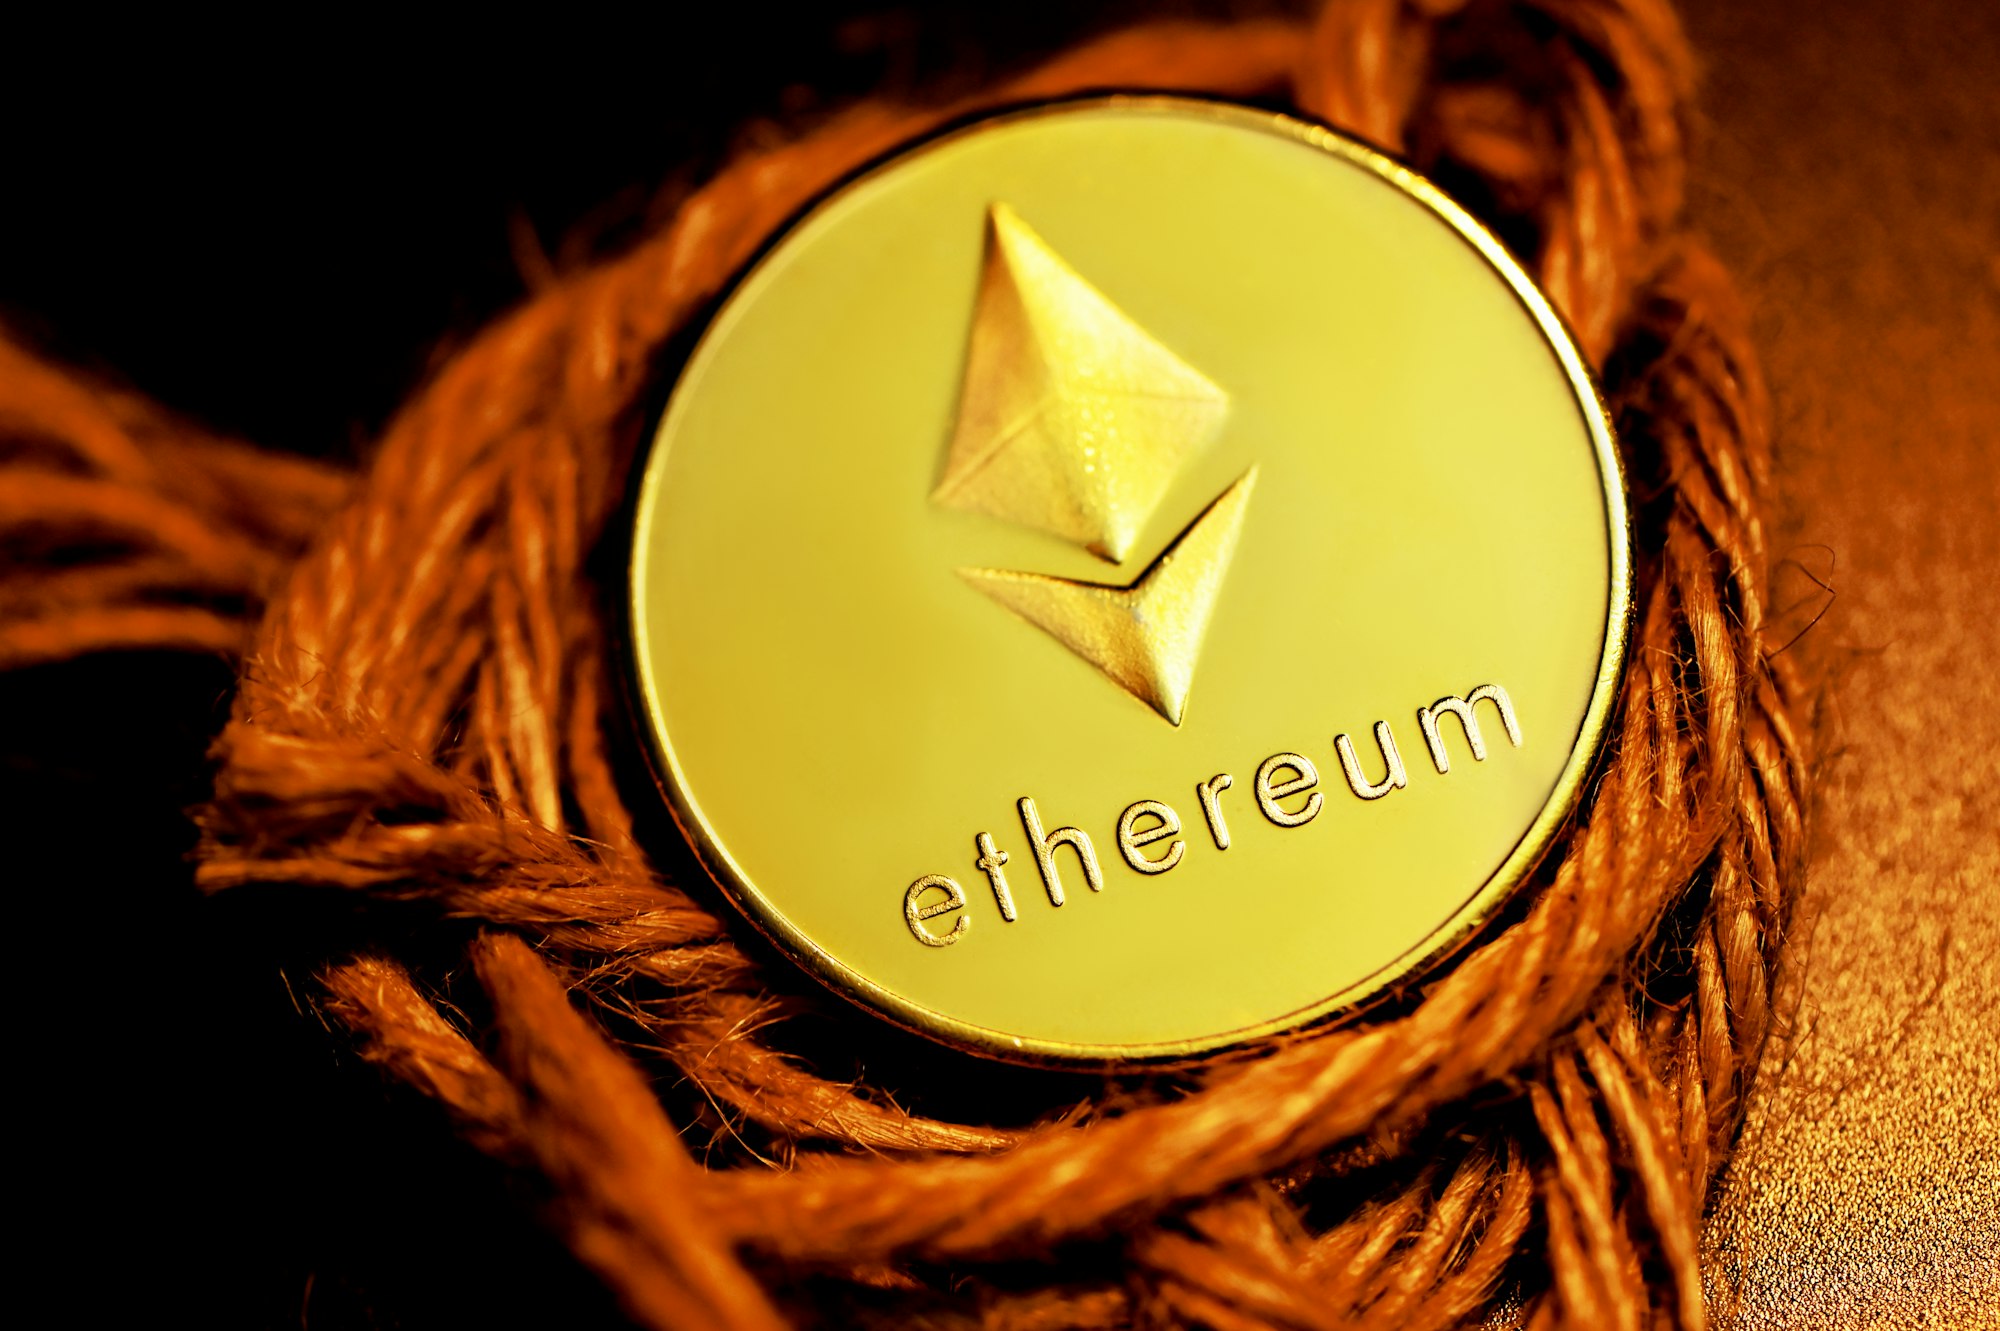 An Ethereum coin on top of a rope